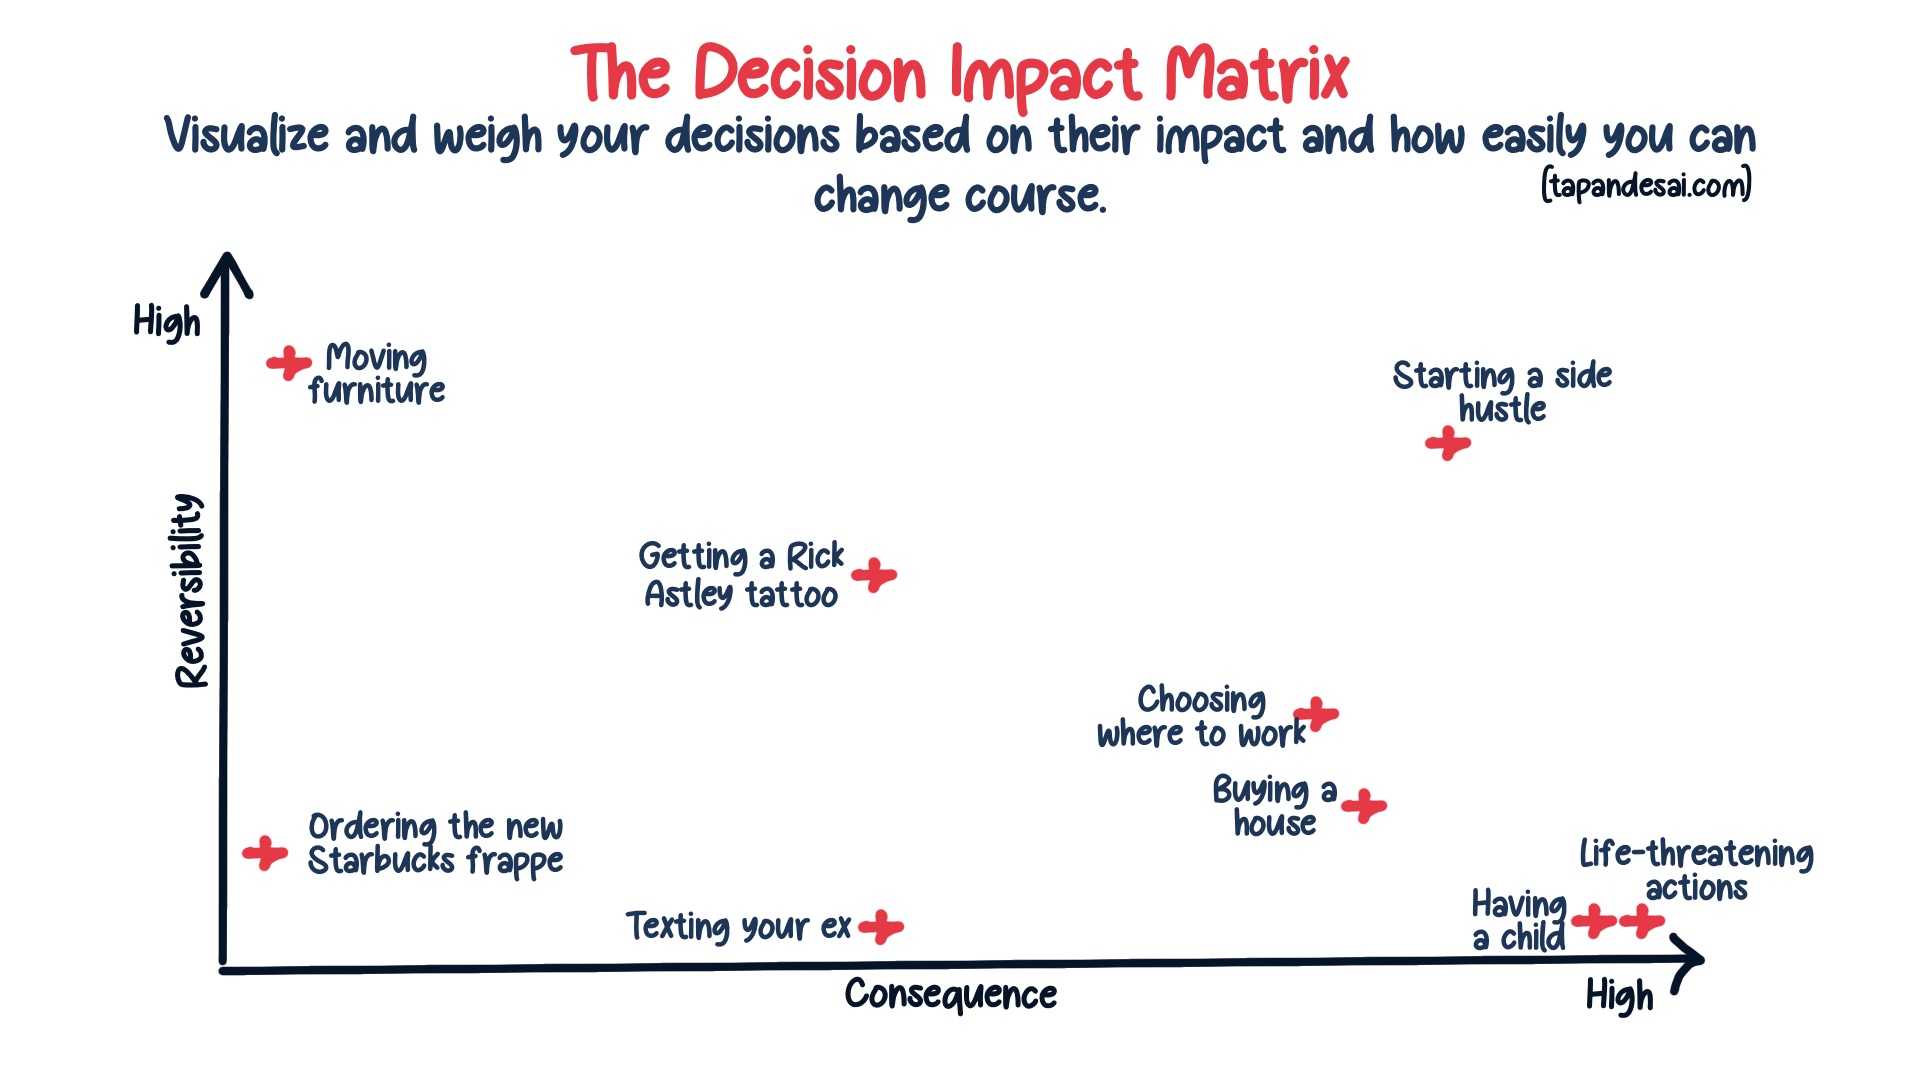 Decision impact matrix visualising and weighing life decisions on reversibility and consequences scale